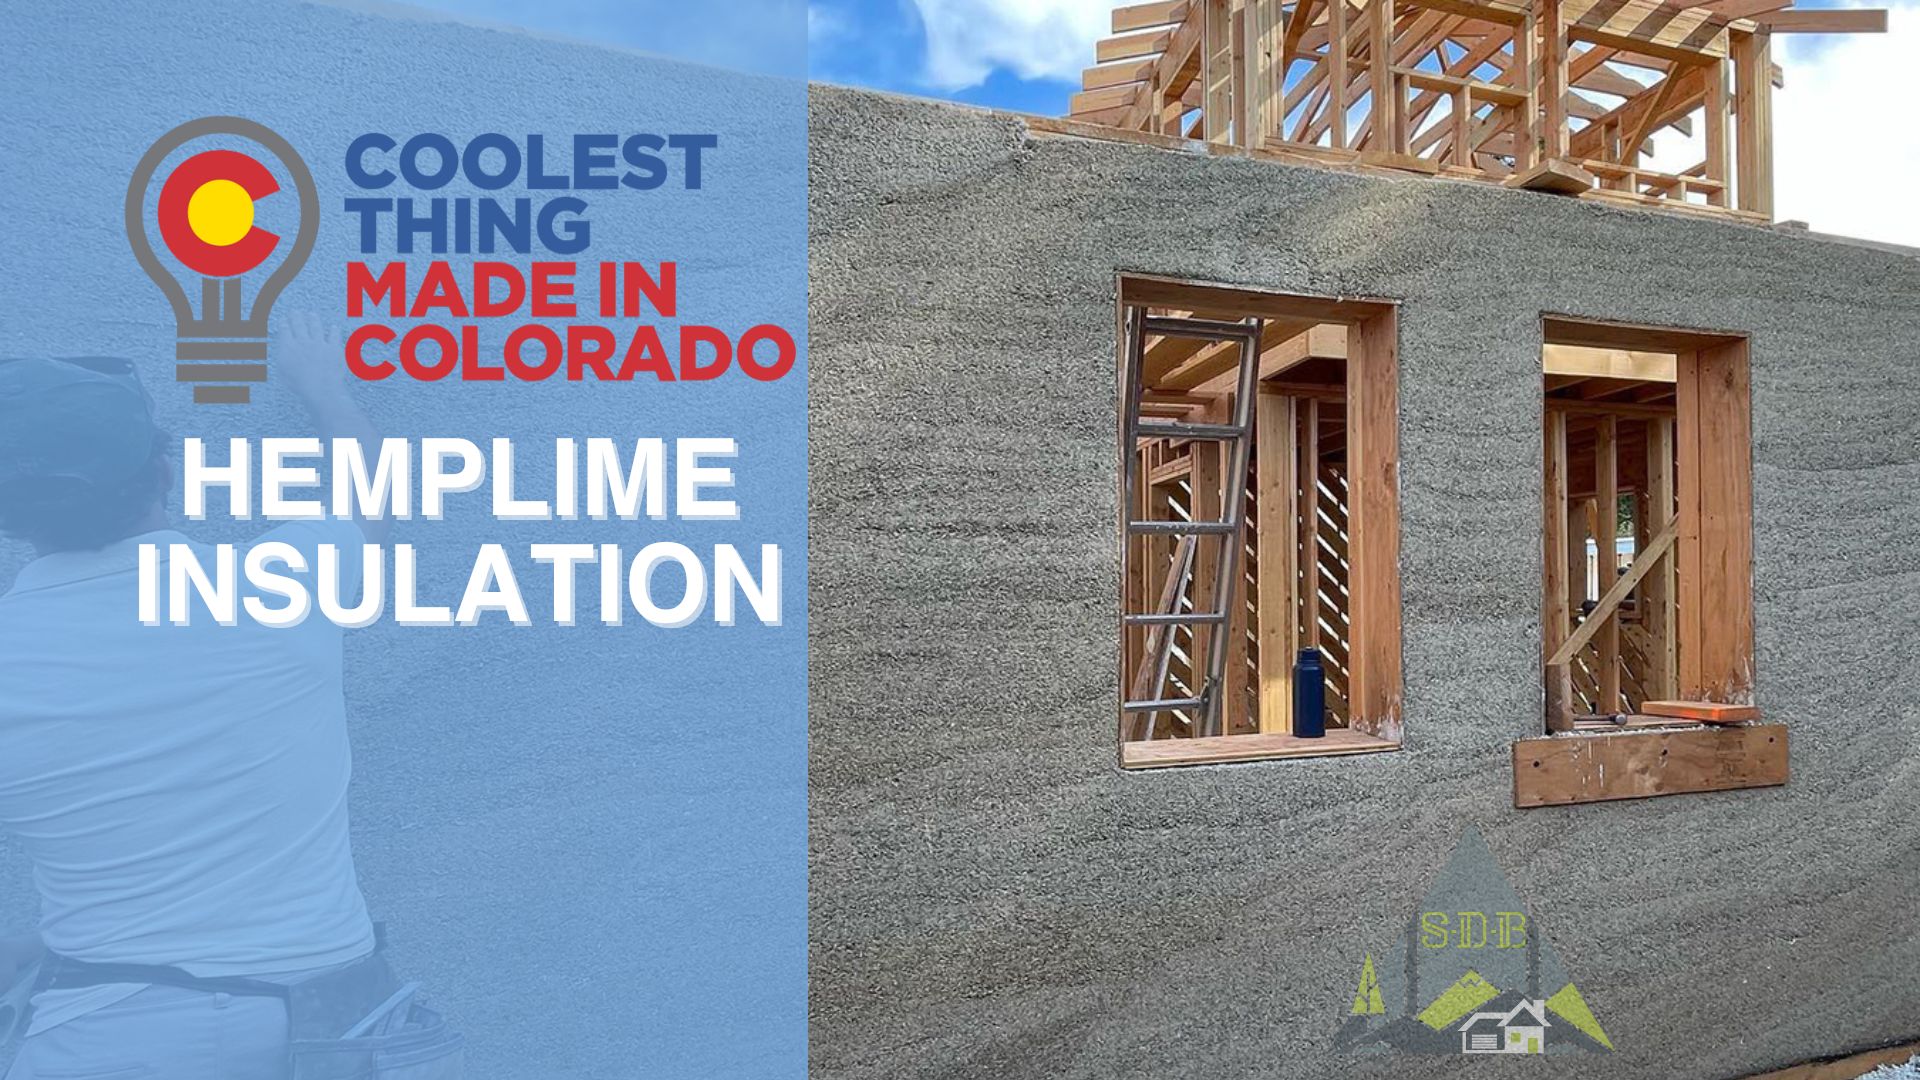 Hemplime Insulation Sustainable Design Build Chamber of Commerce Coolest thing in Colorado